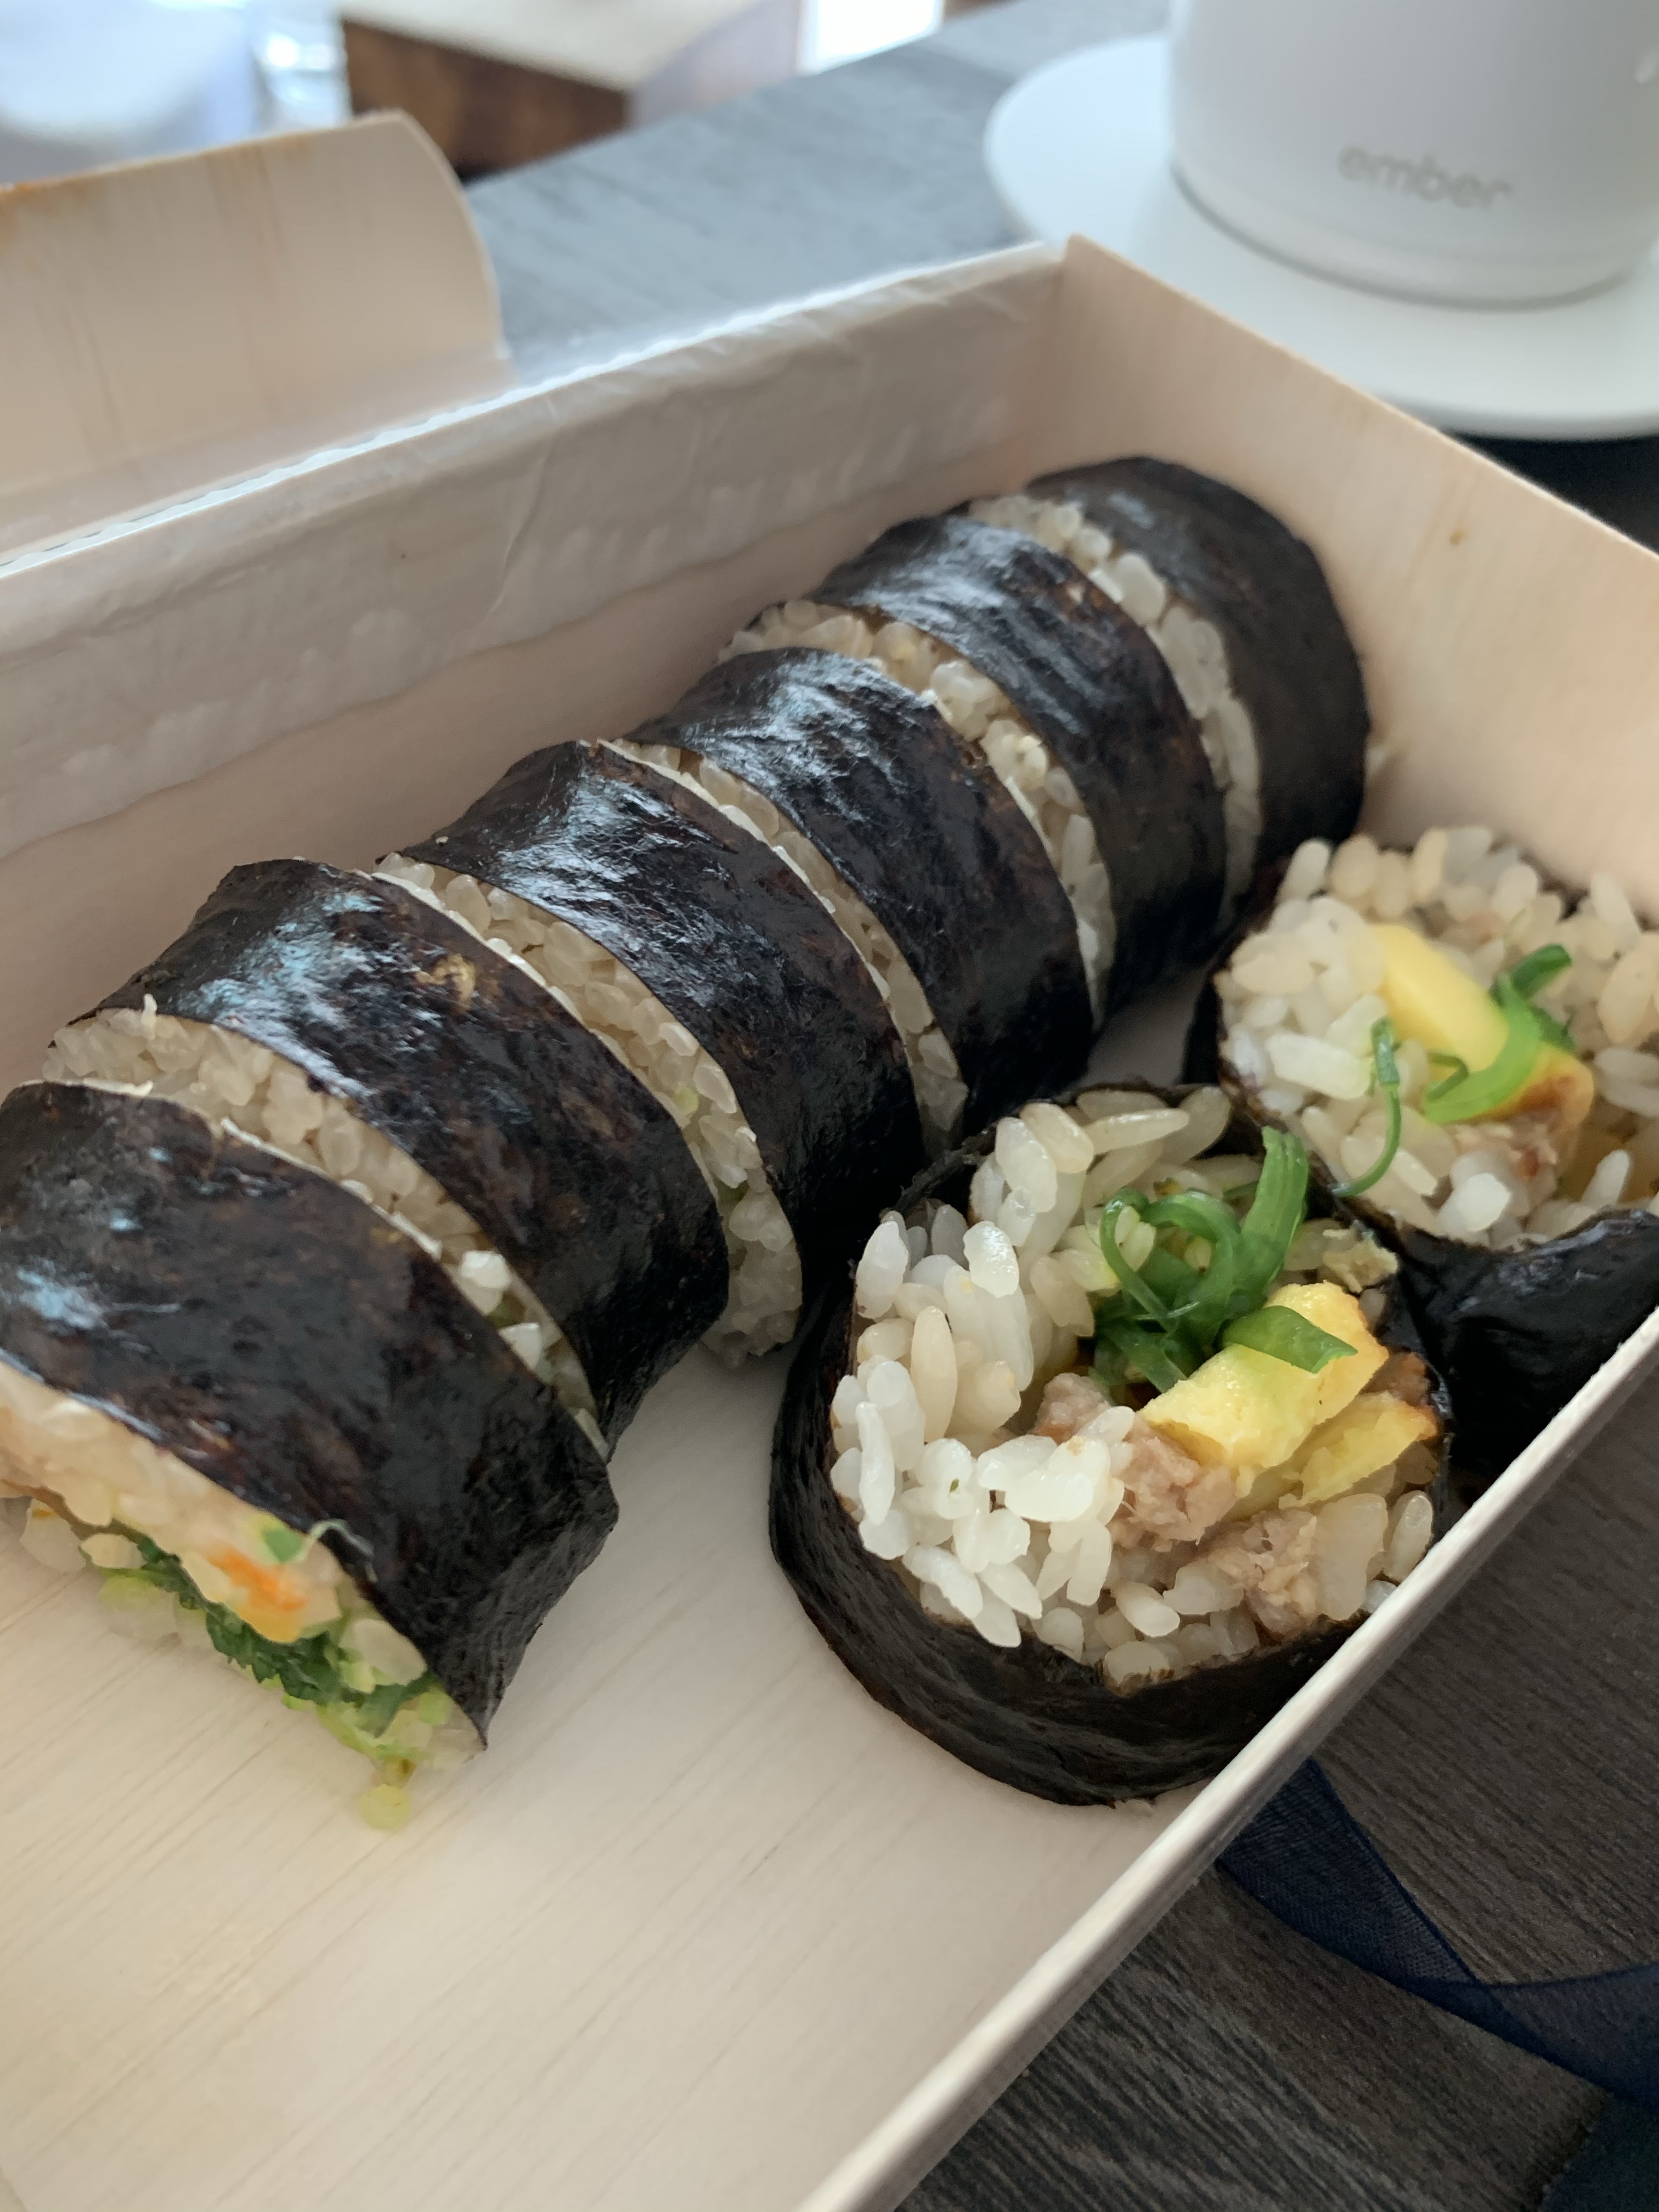 Korean kimbap in a wooden box, filled with egg, green onion, and other vegetables not visible.